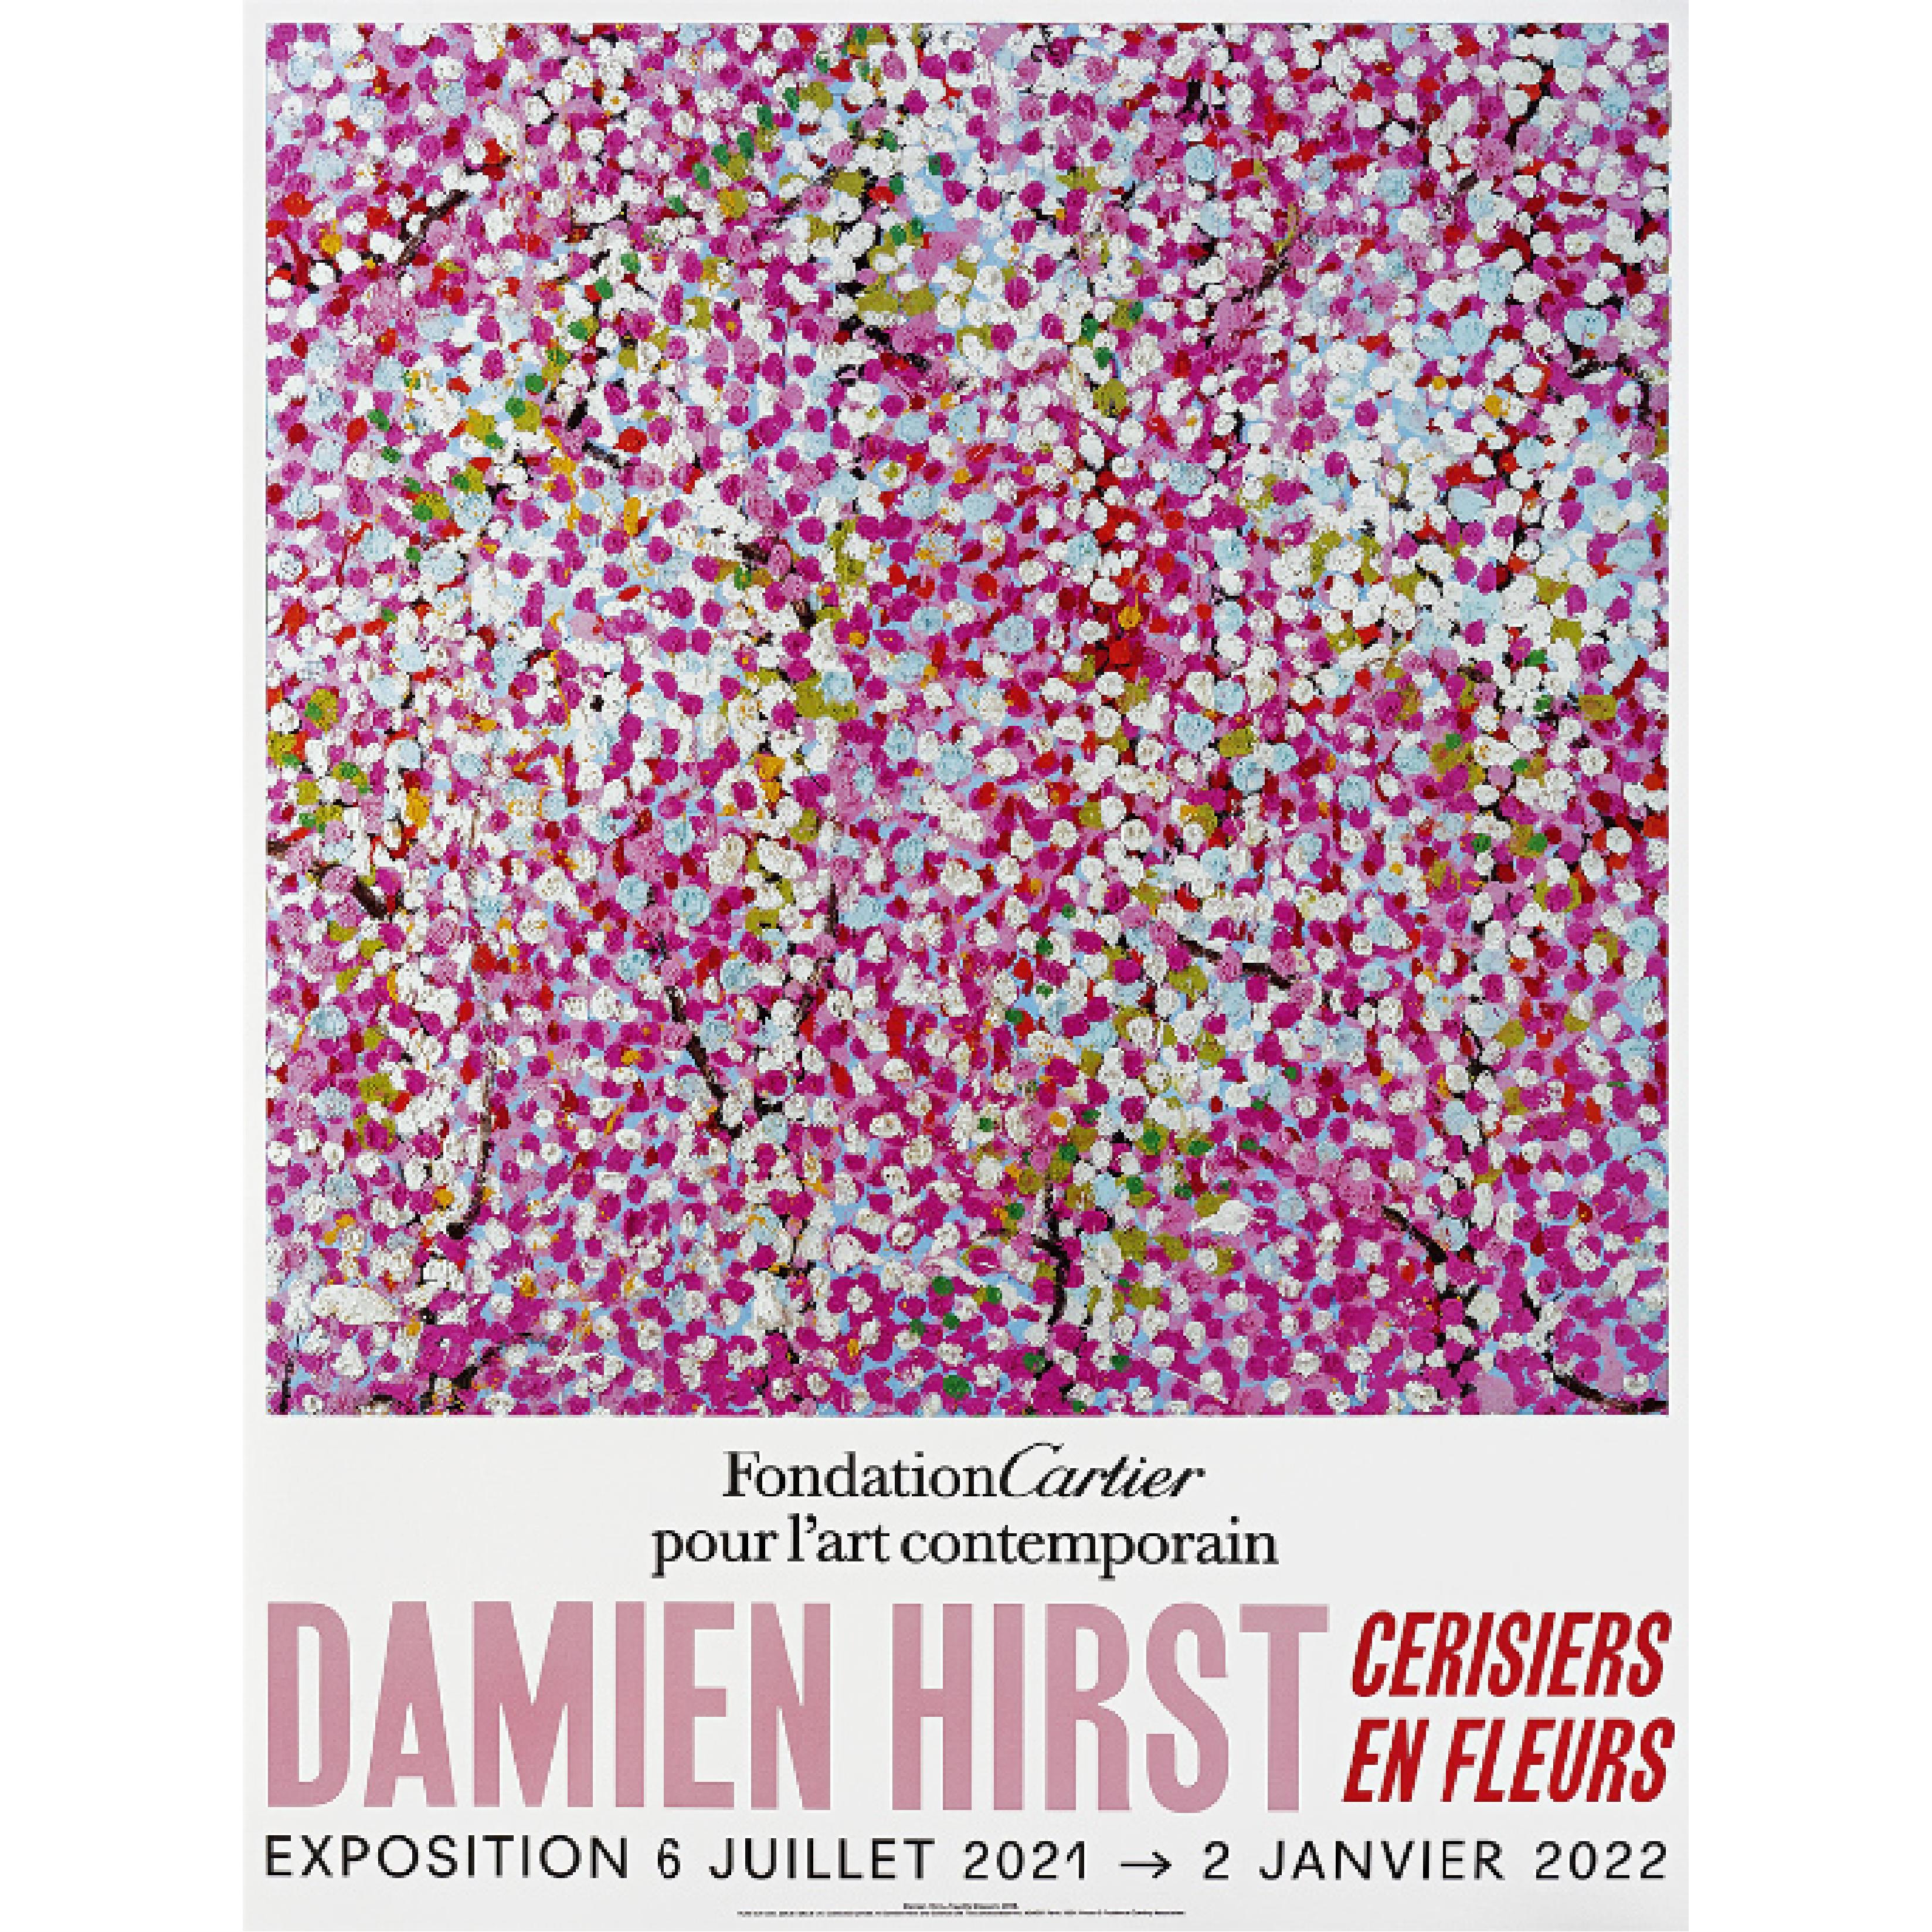 A complete set of 6 exhibition posters from the 'Cerisiers En Fleurs' Paris Cartier Foundation exhibition, printed in colours on 220 gsm fine art paper.

The Cartier Foundation for Contemporary Art is currently exhibiting 